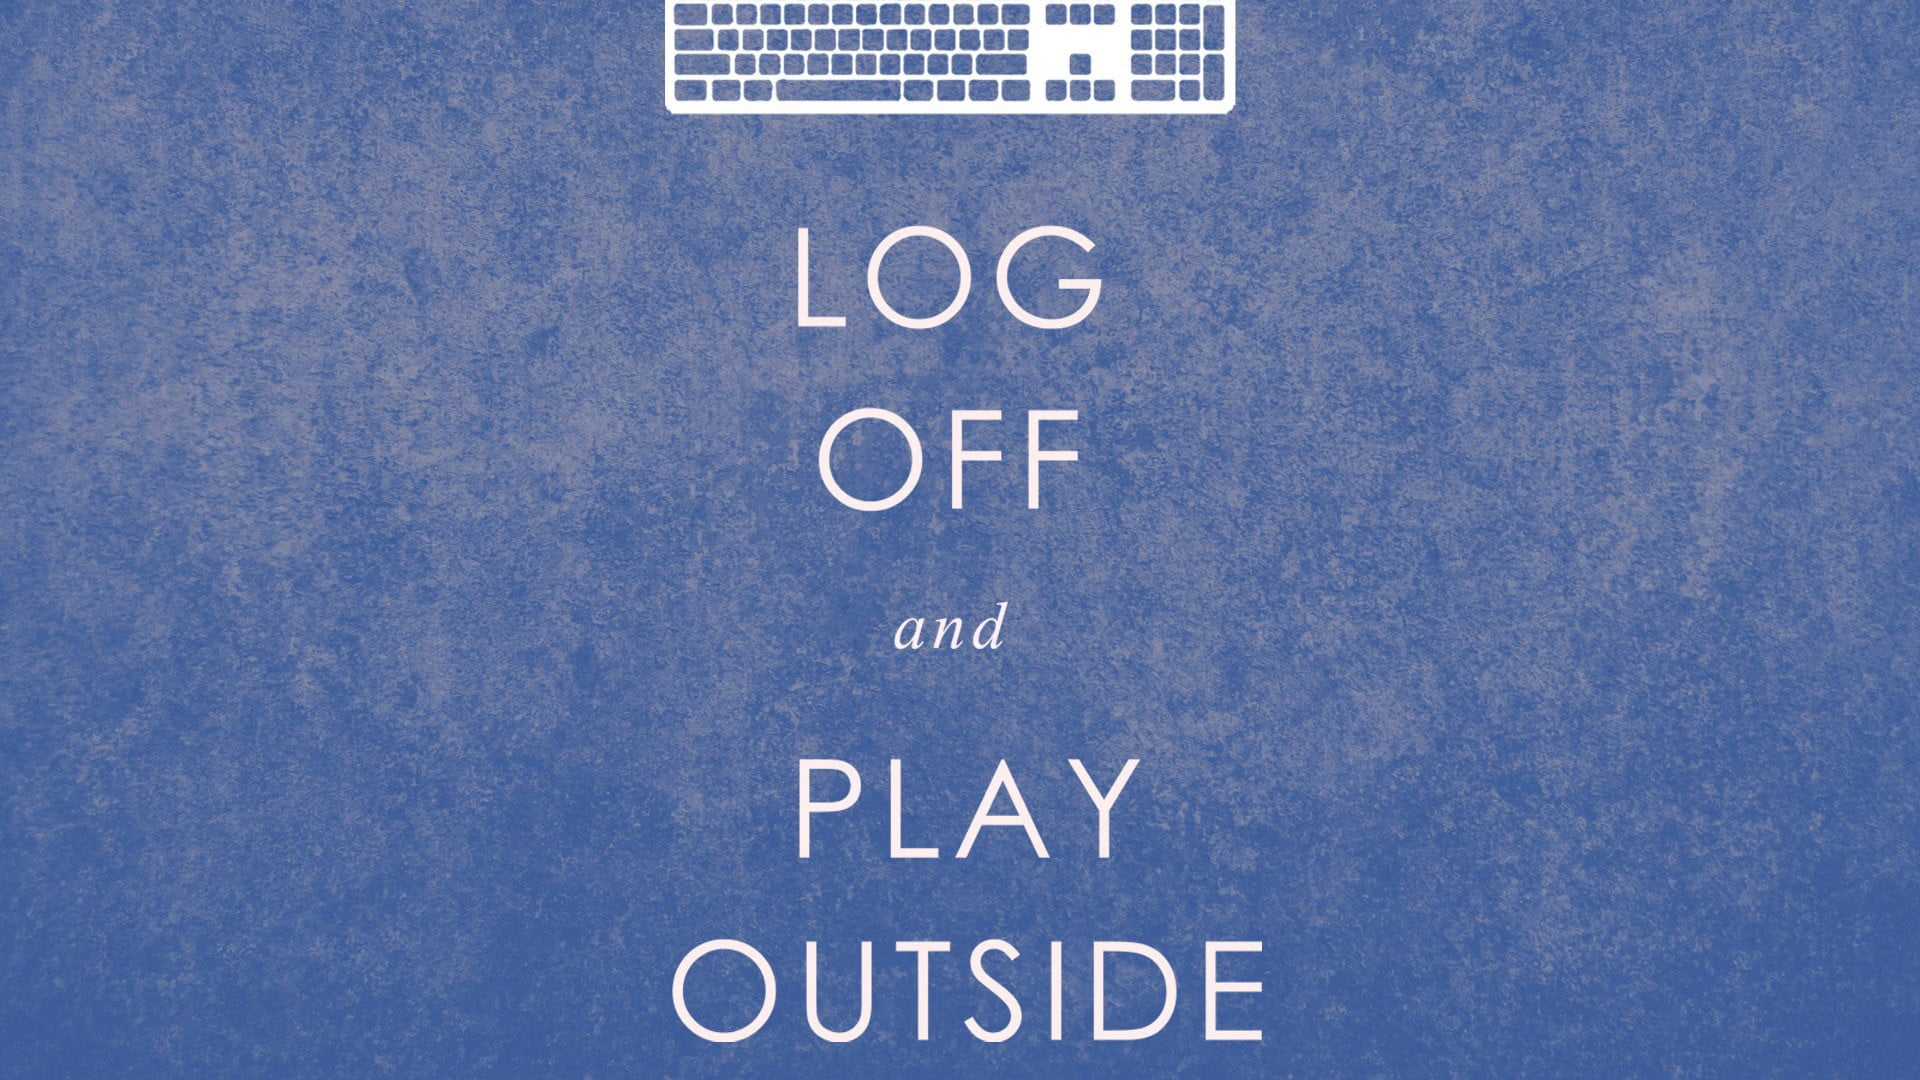 log off and play outside text, digital art, minimalism, blue background, quote